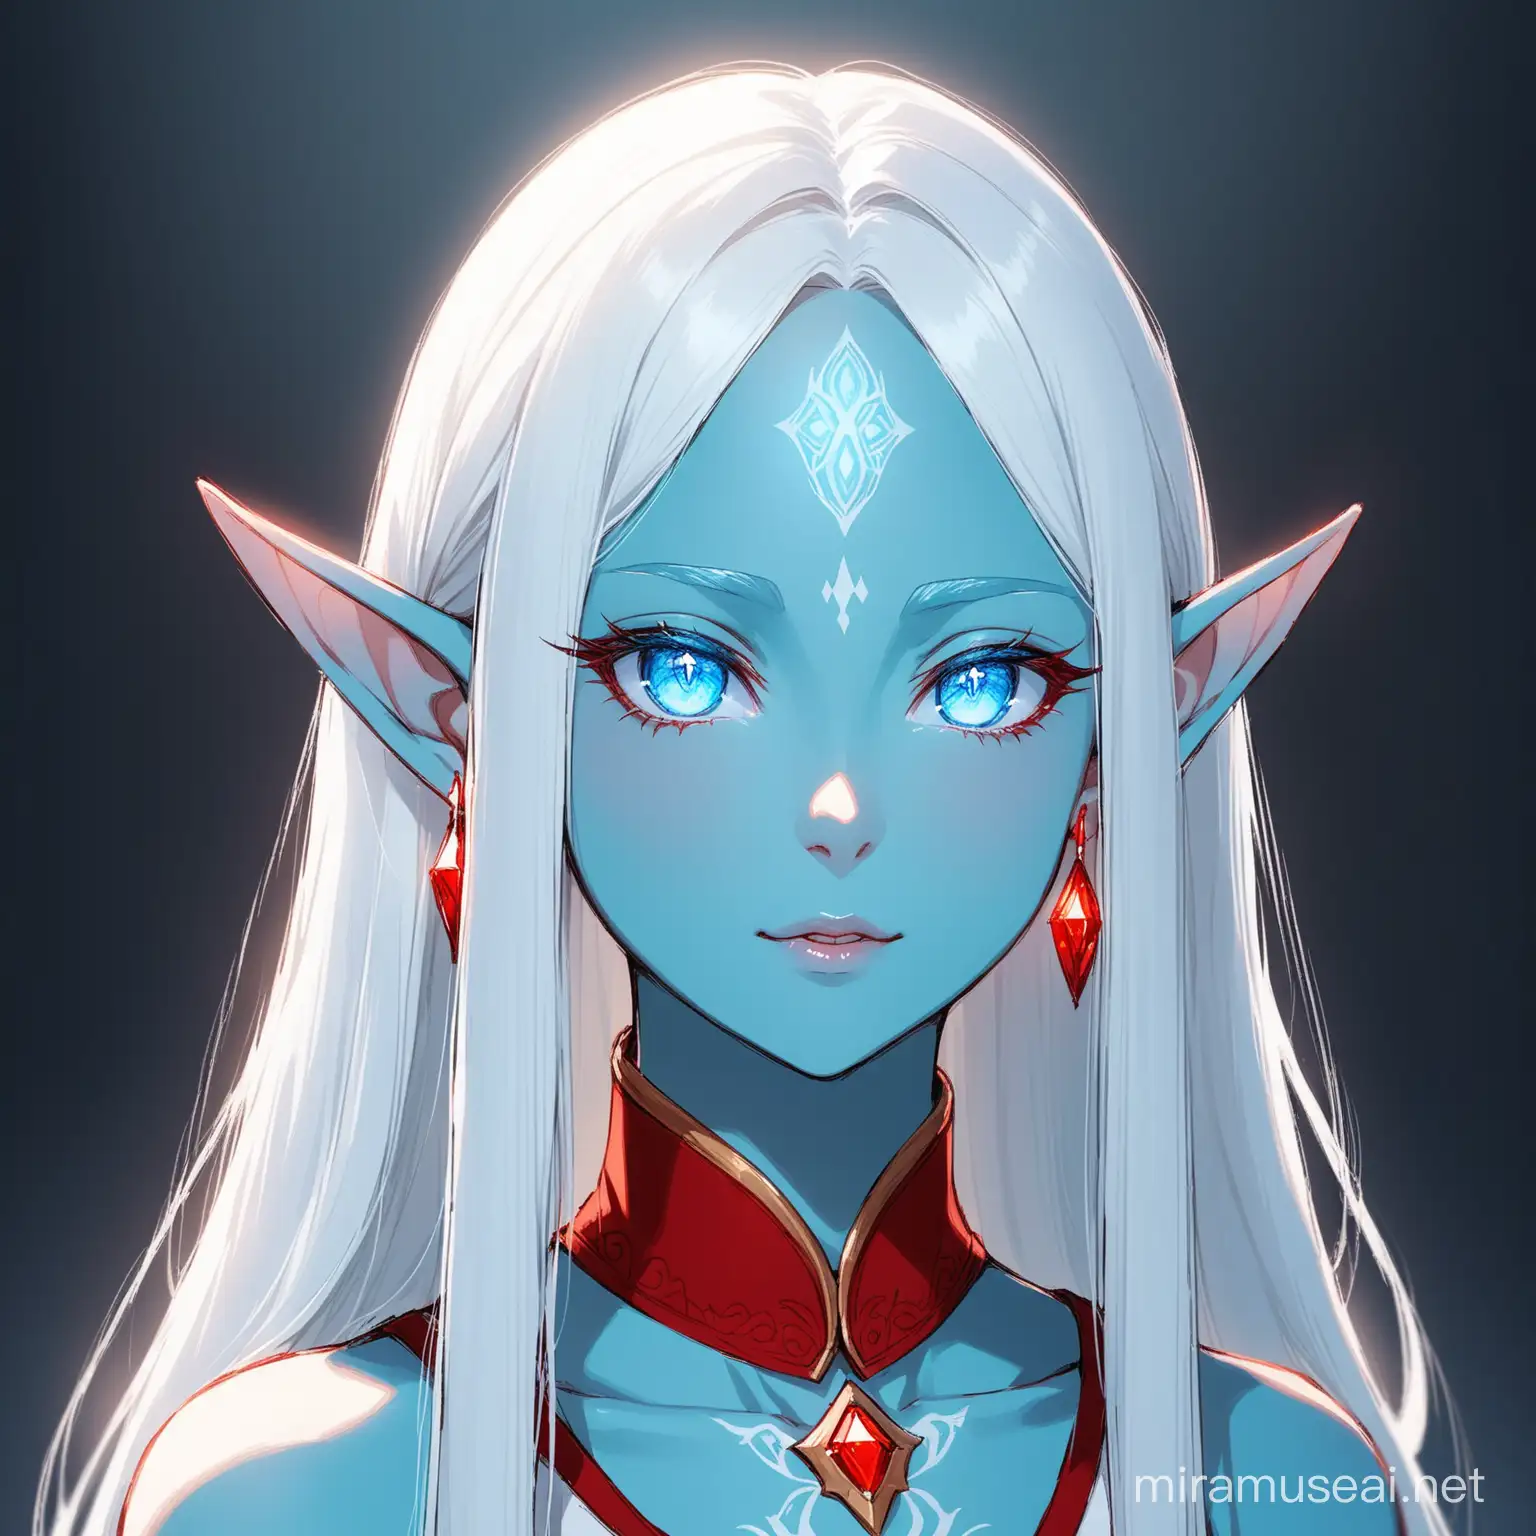 Ethereal Elf with White Hair and Blue Features Wearing Red Earrings